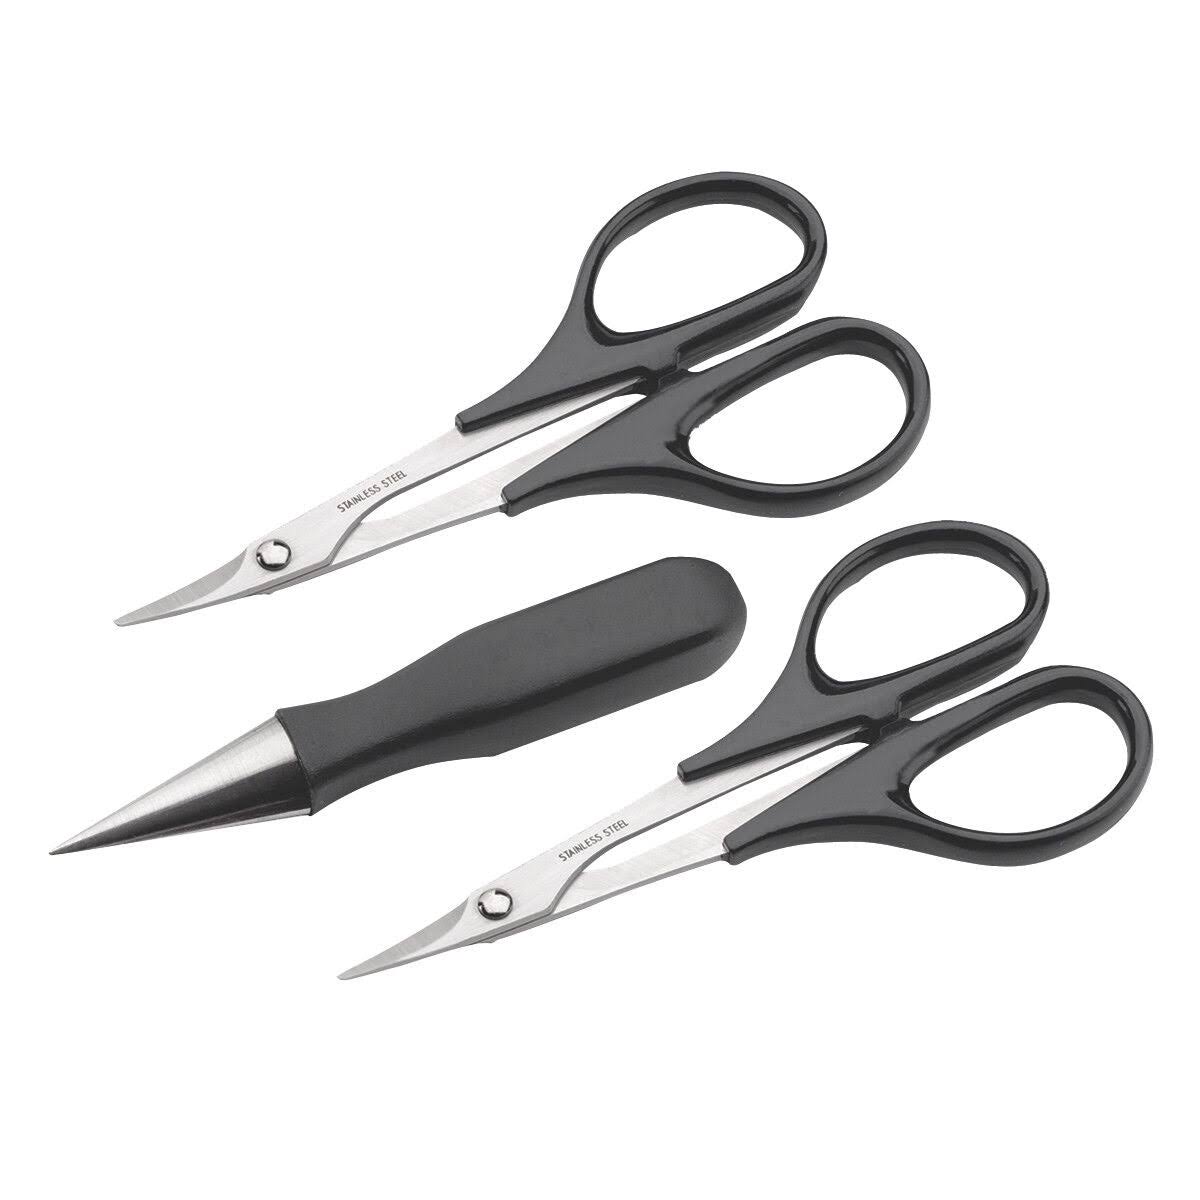 Du Bro Products Body Reamer Straight Scissors and Curved Scissors Set